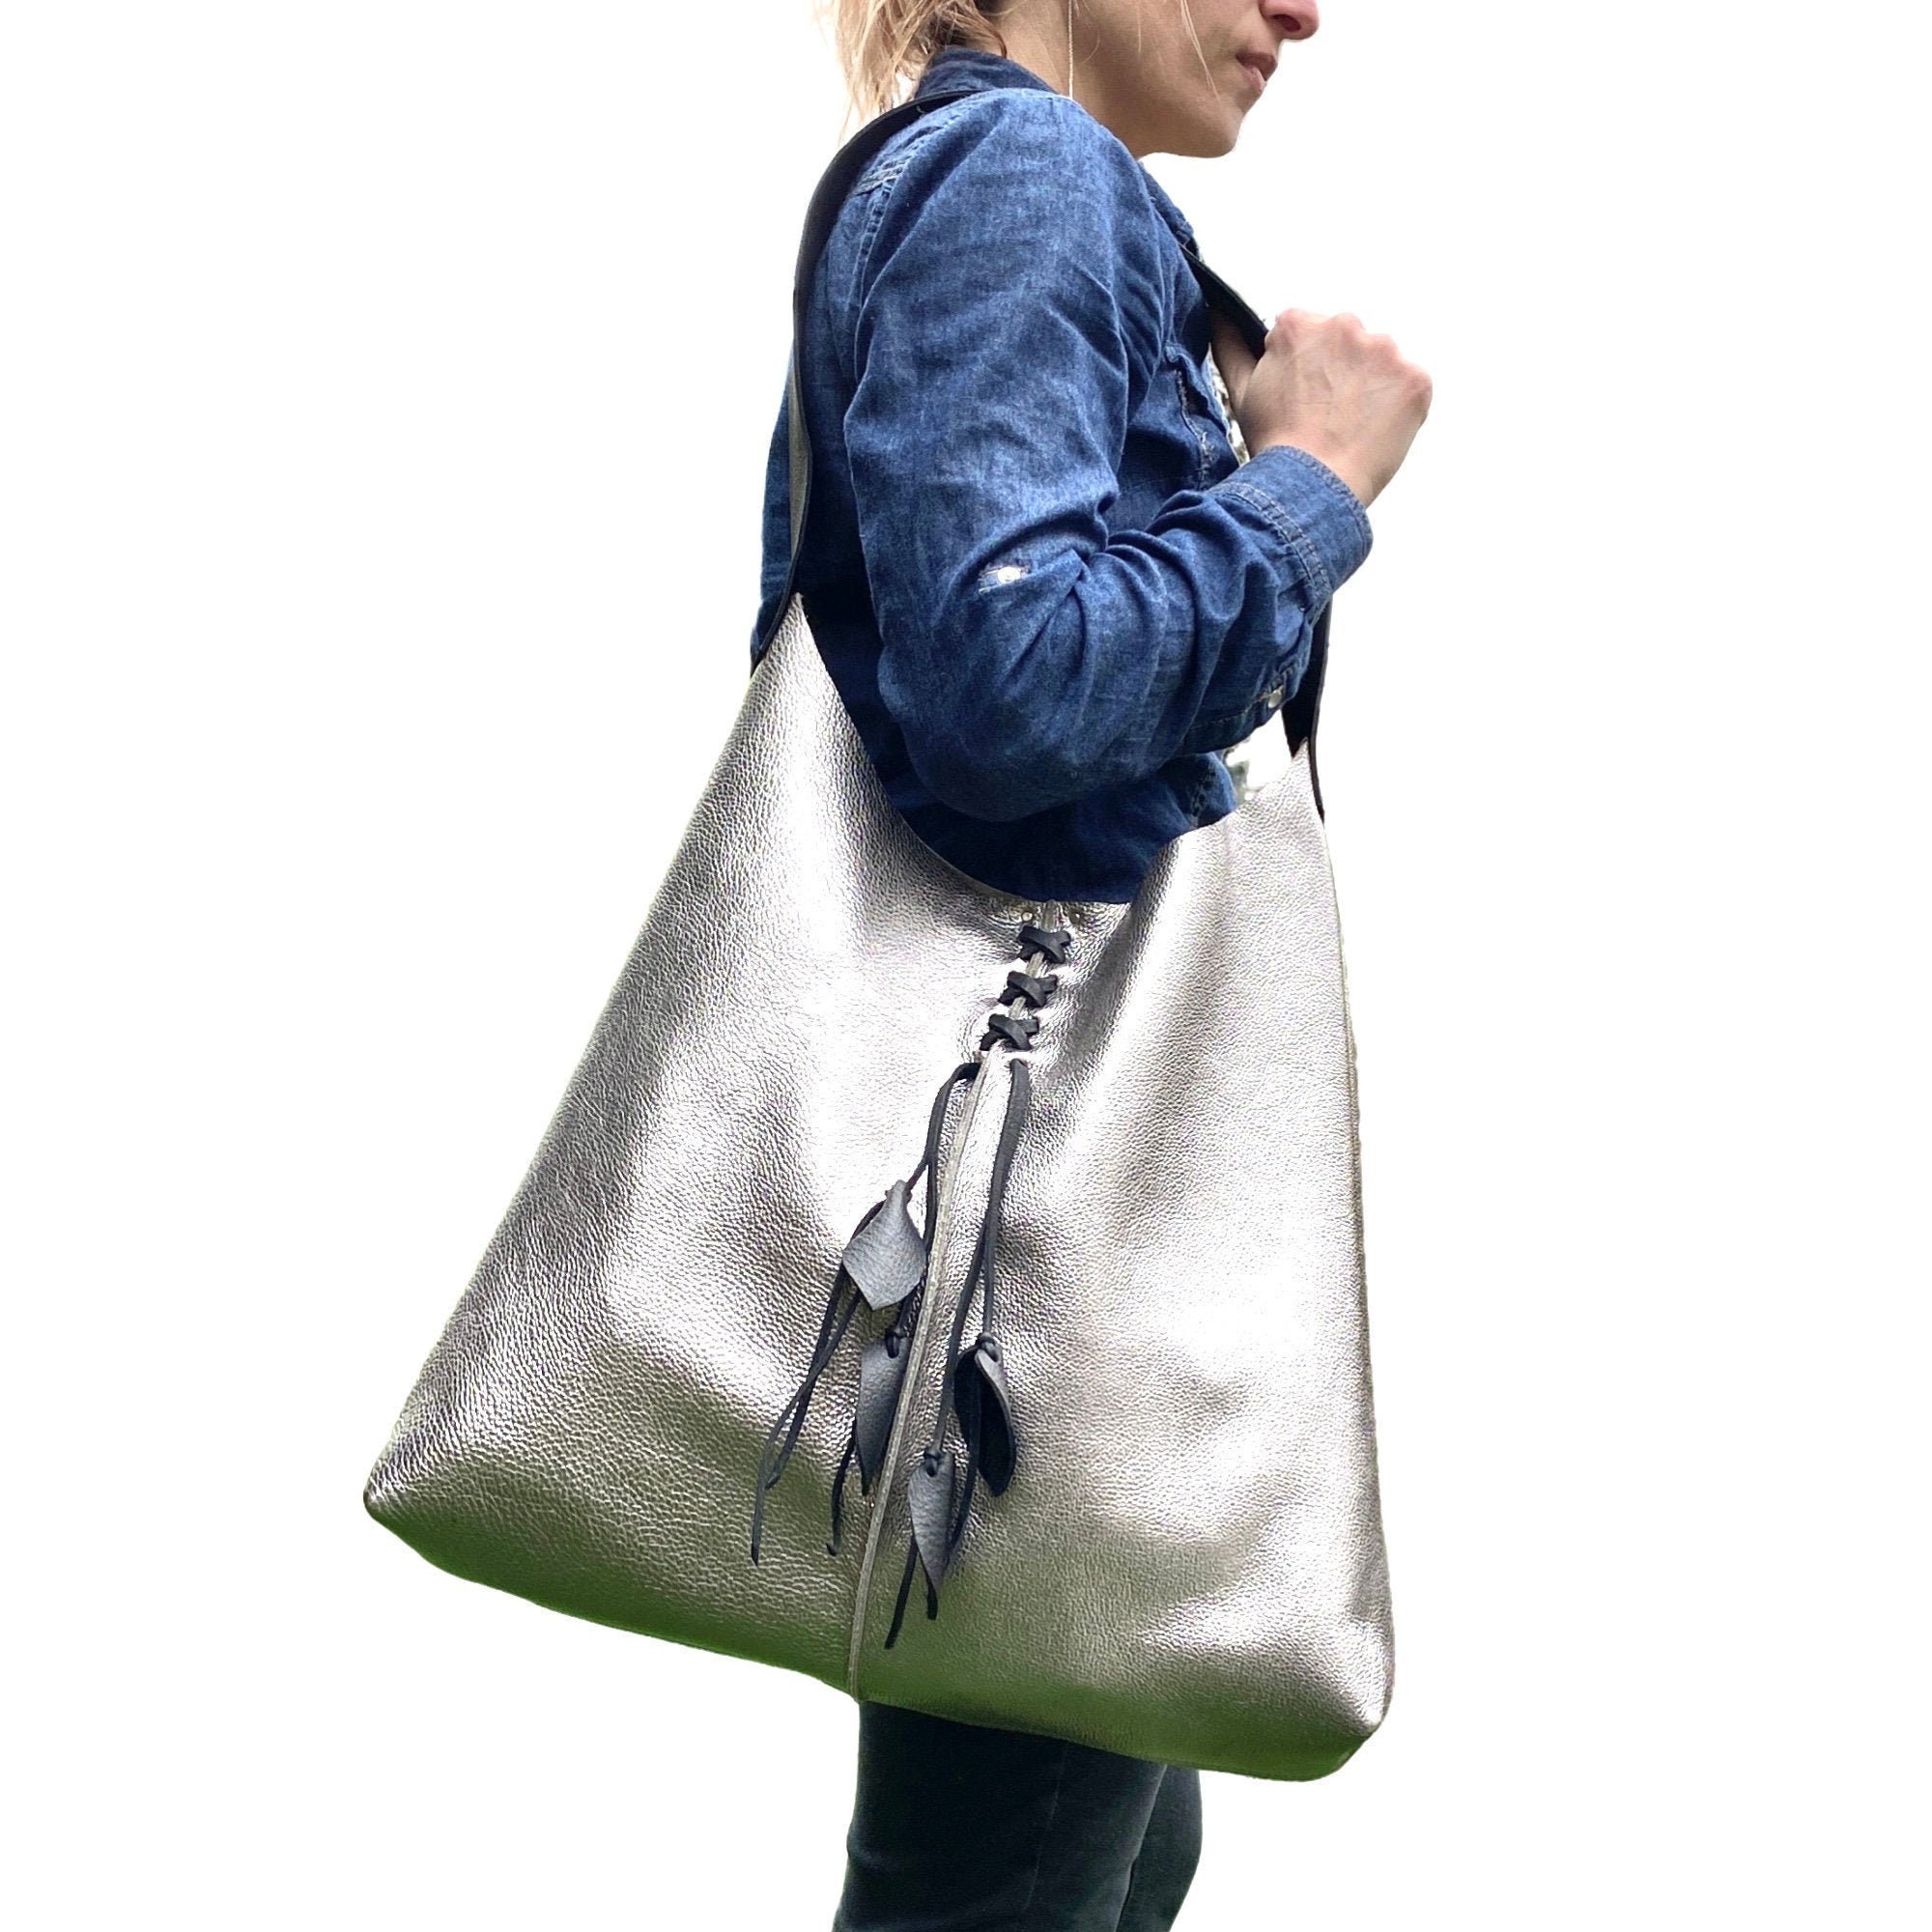 Silver Leather Bag, Metallic Leather Tote Bag, Leather Hobo